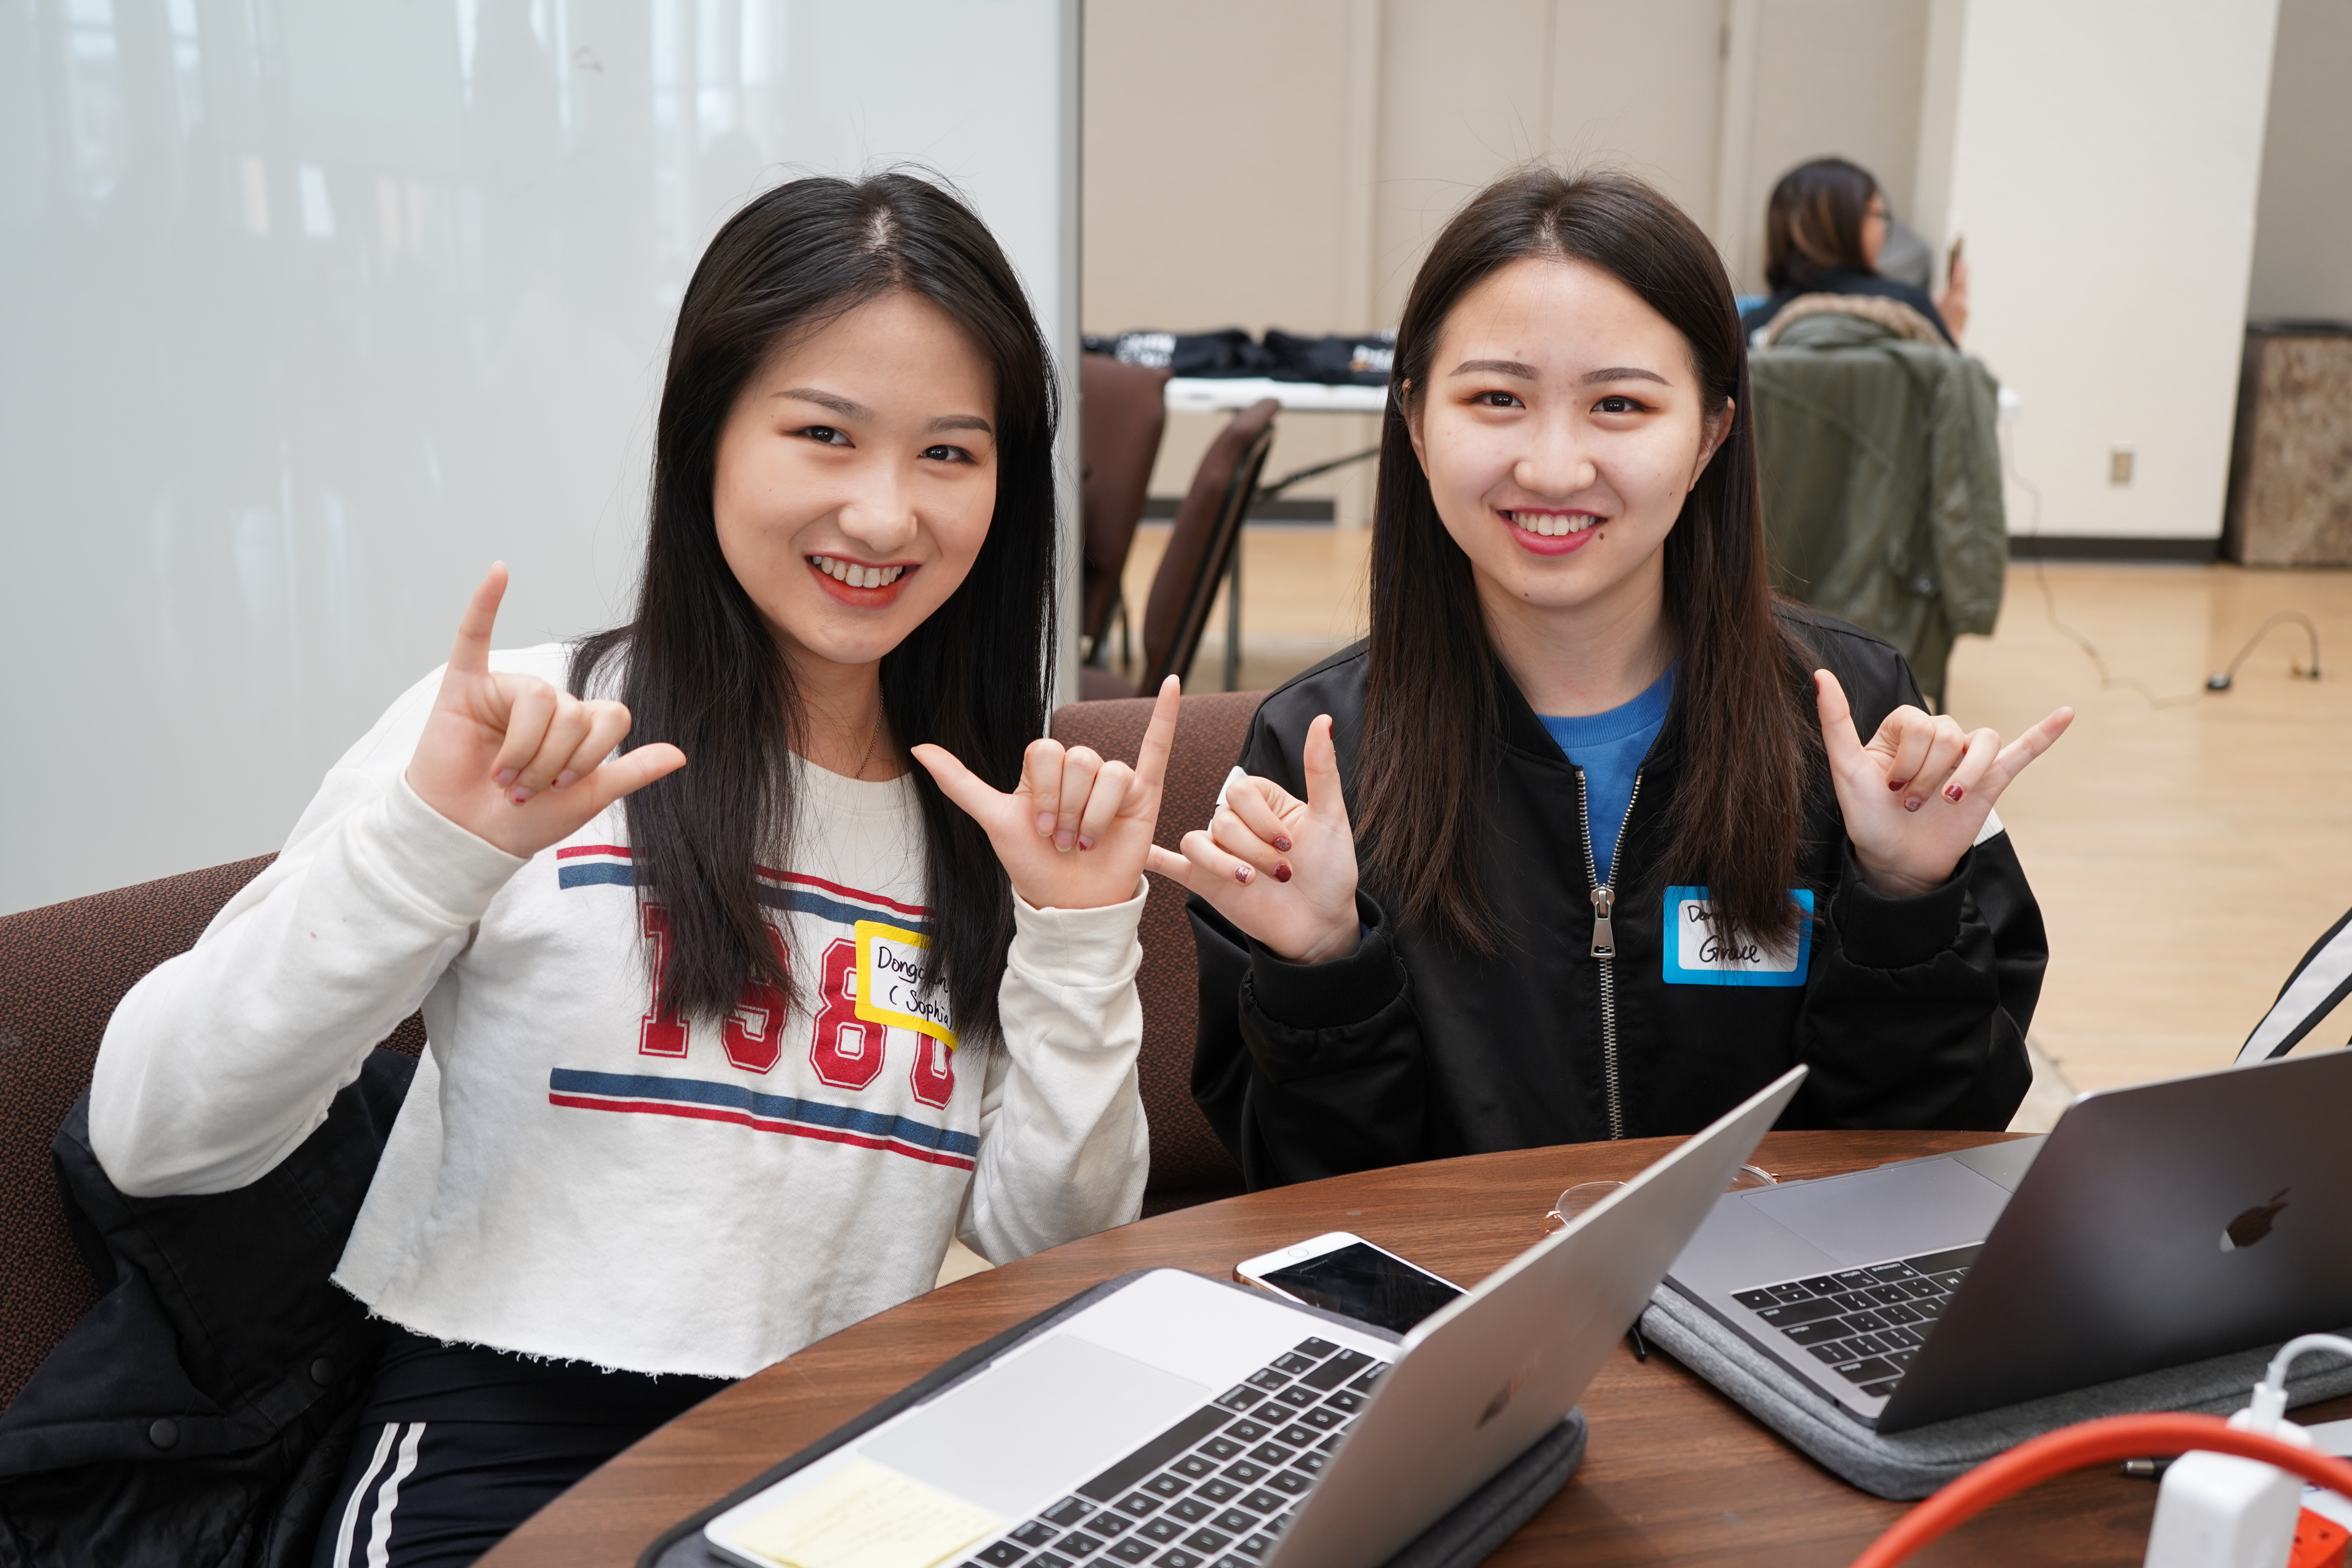 two young women giving the mav up hand gesture